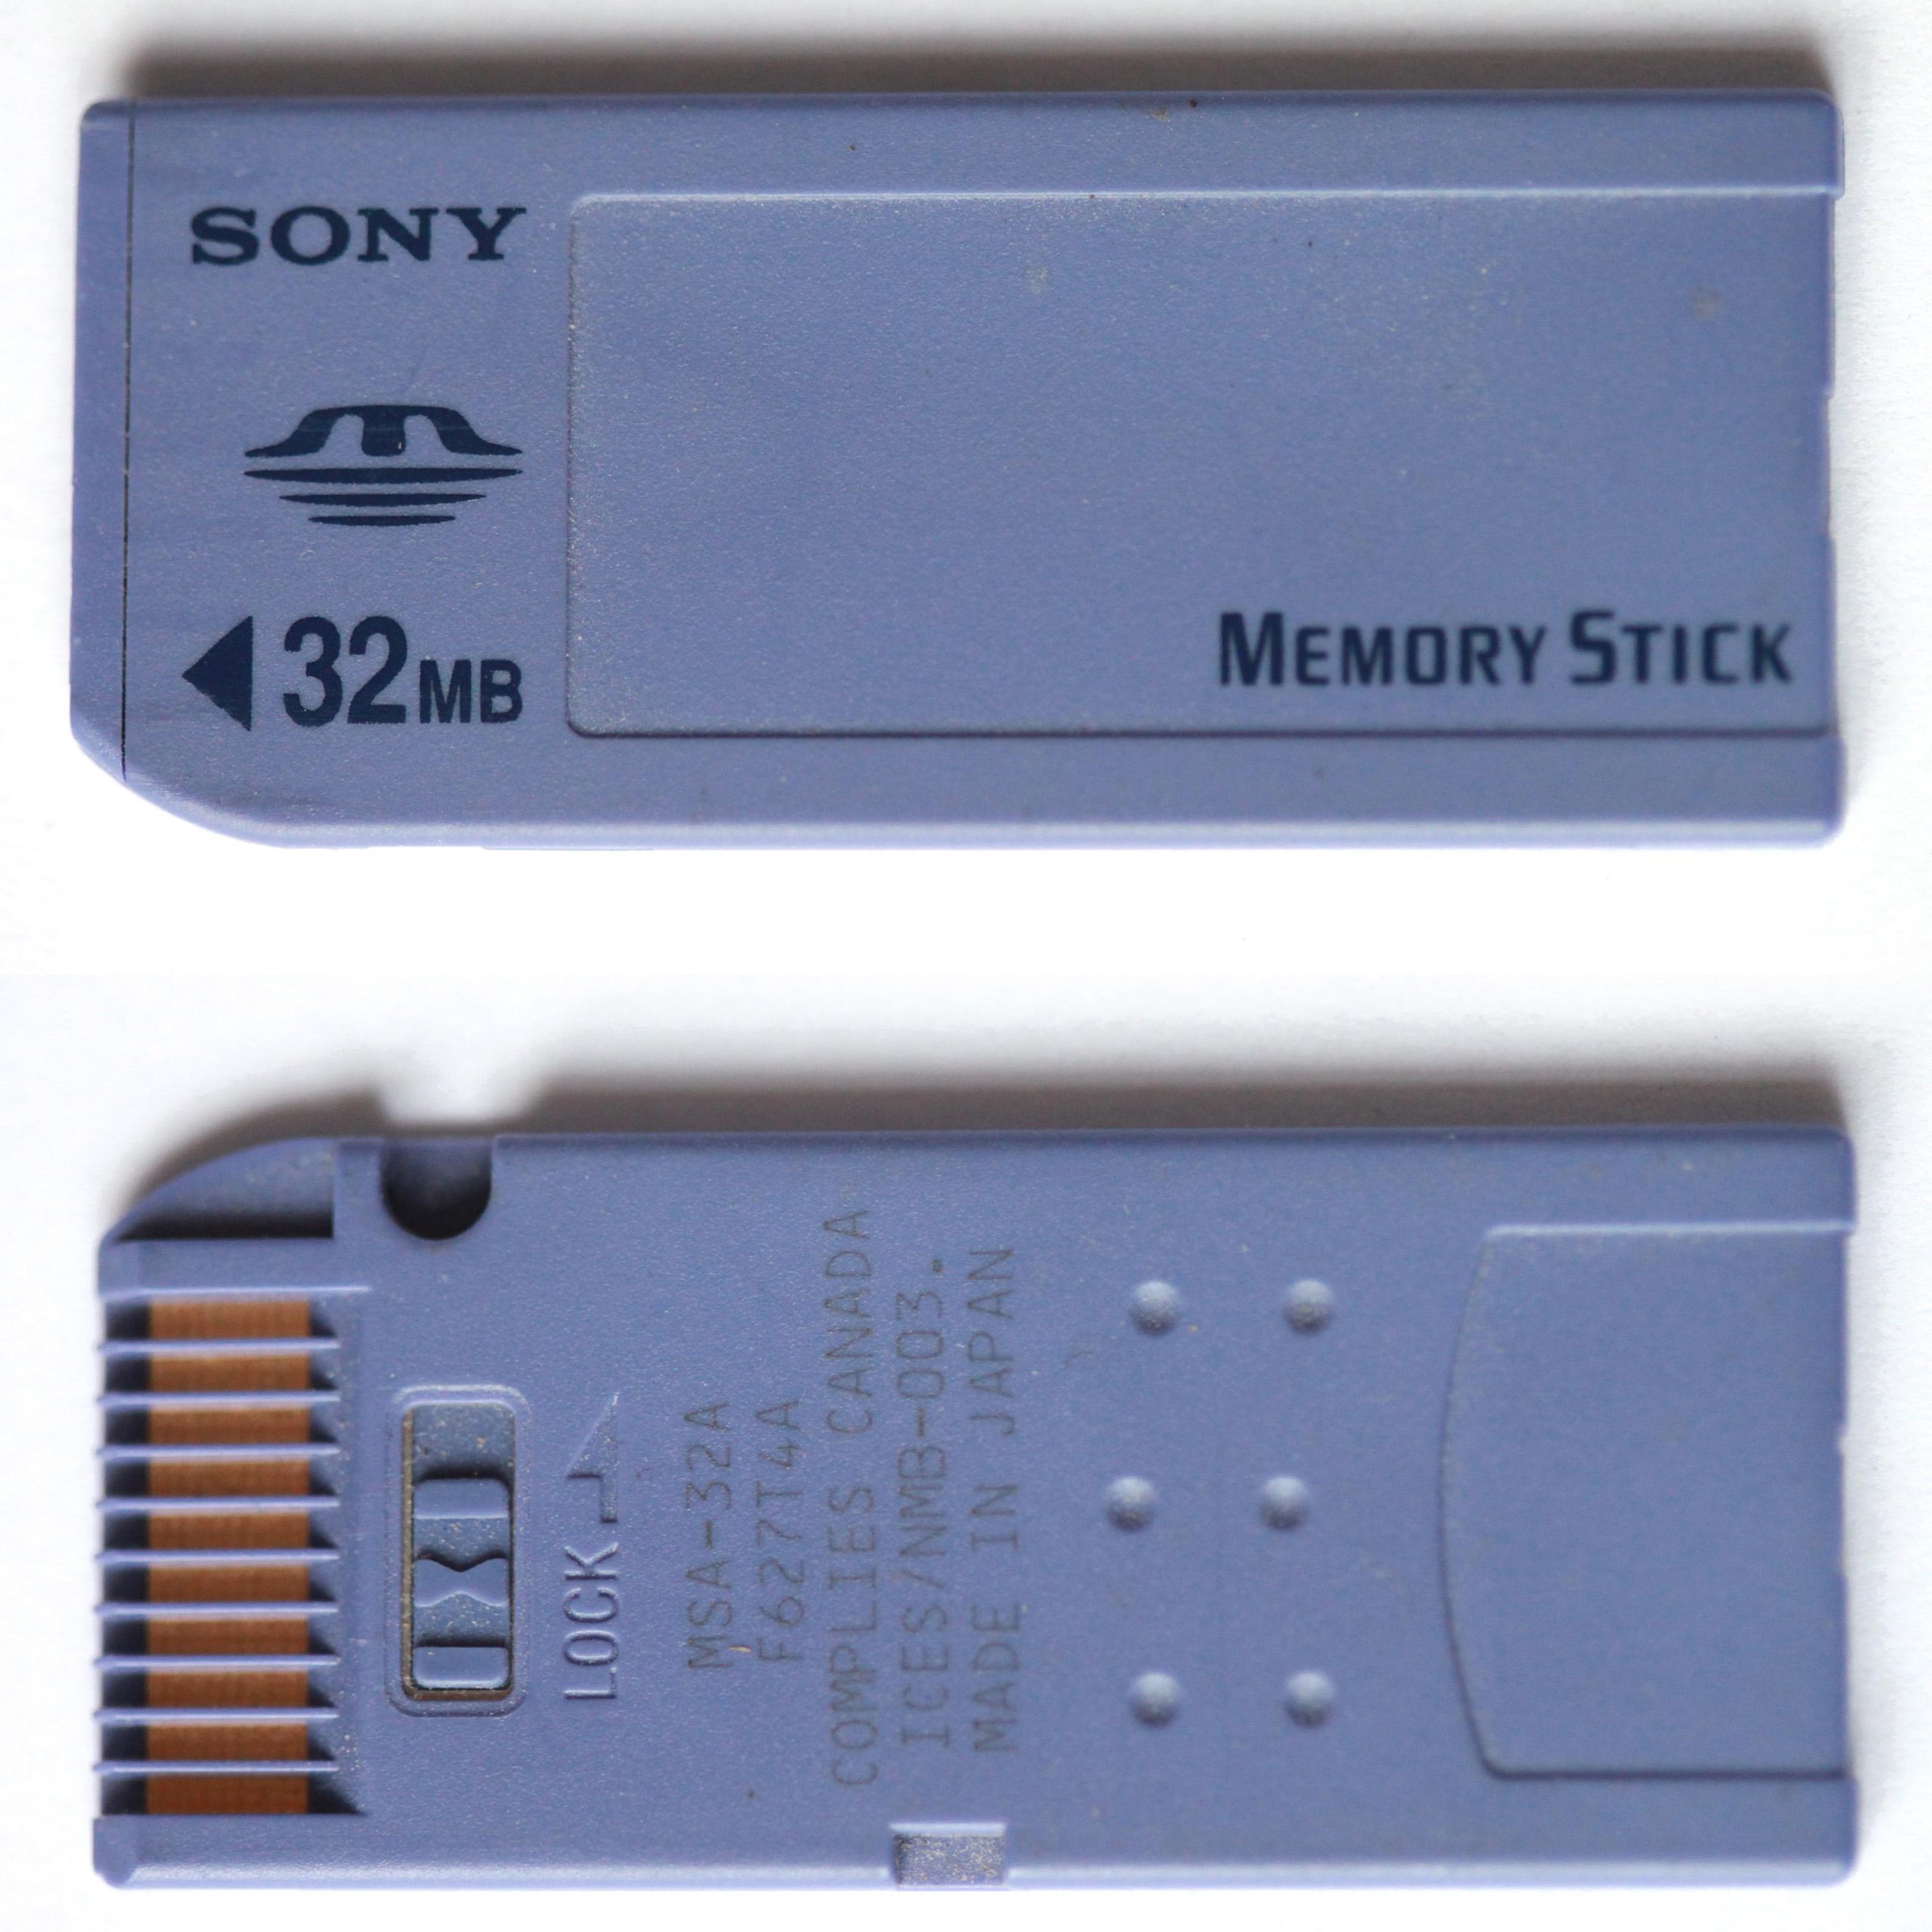 How to Use a Memory Stick